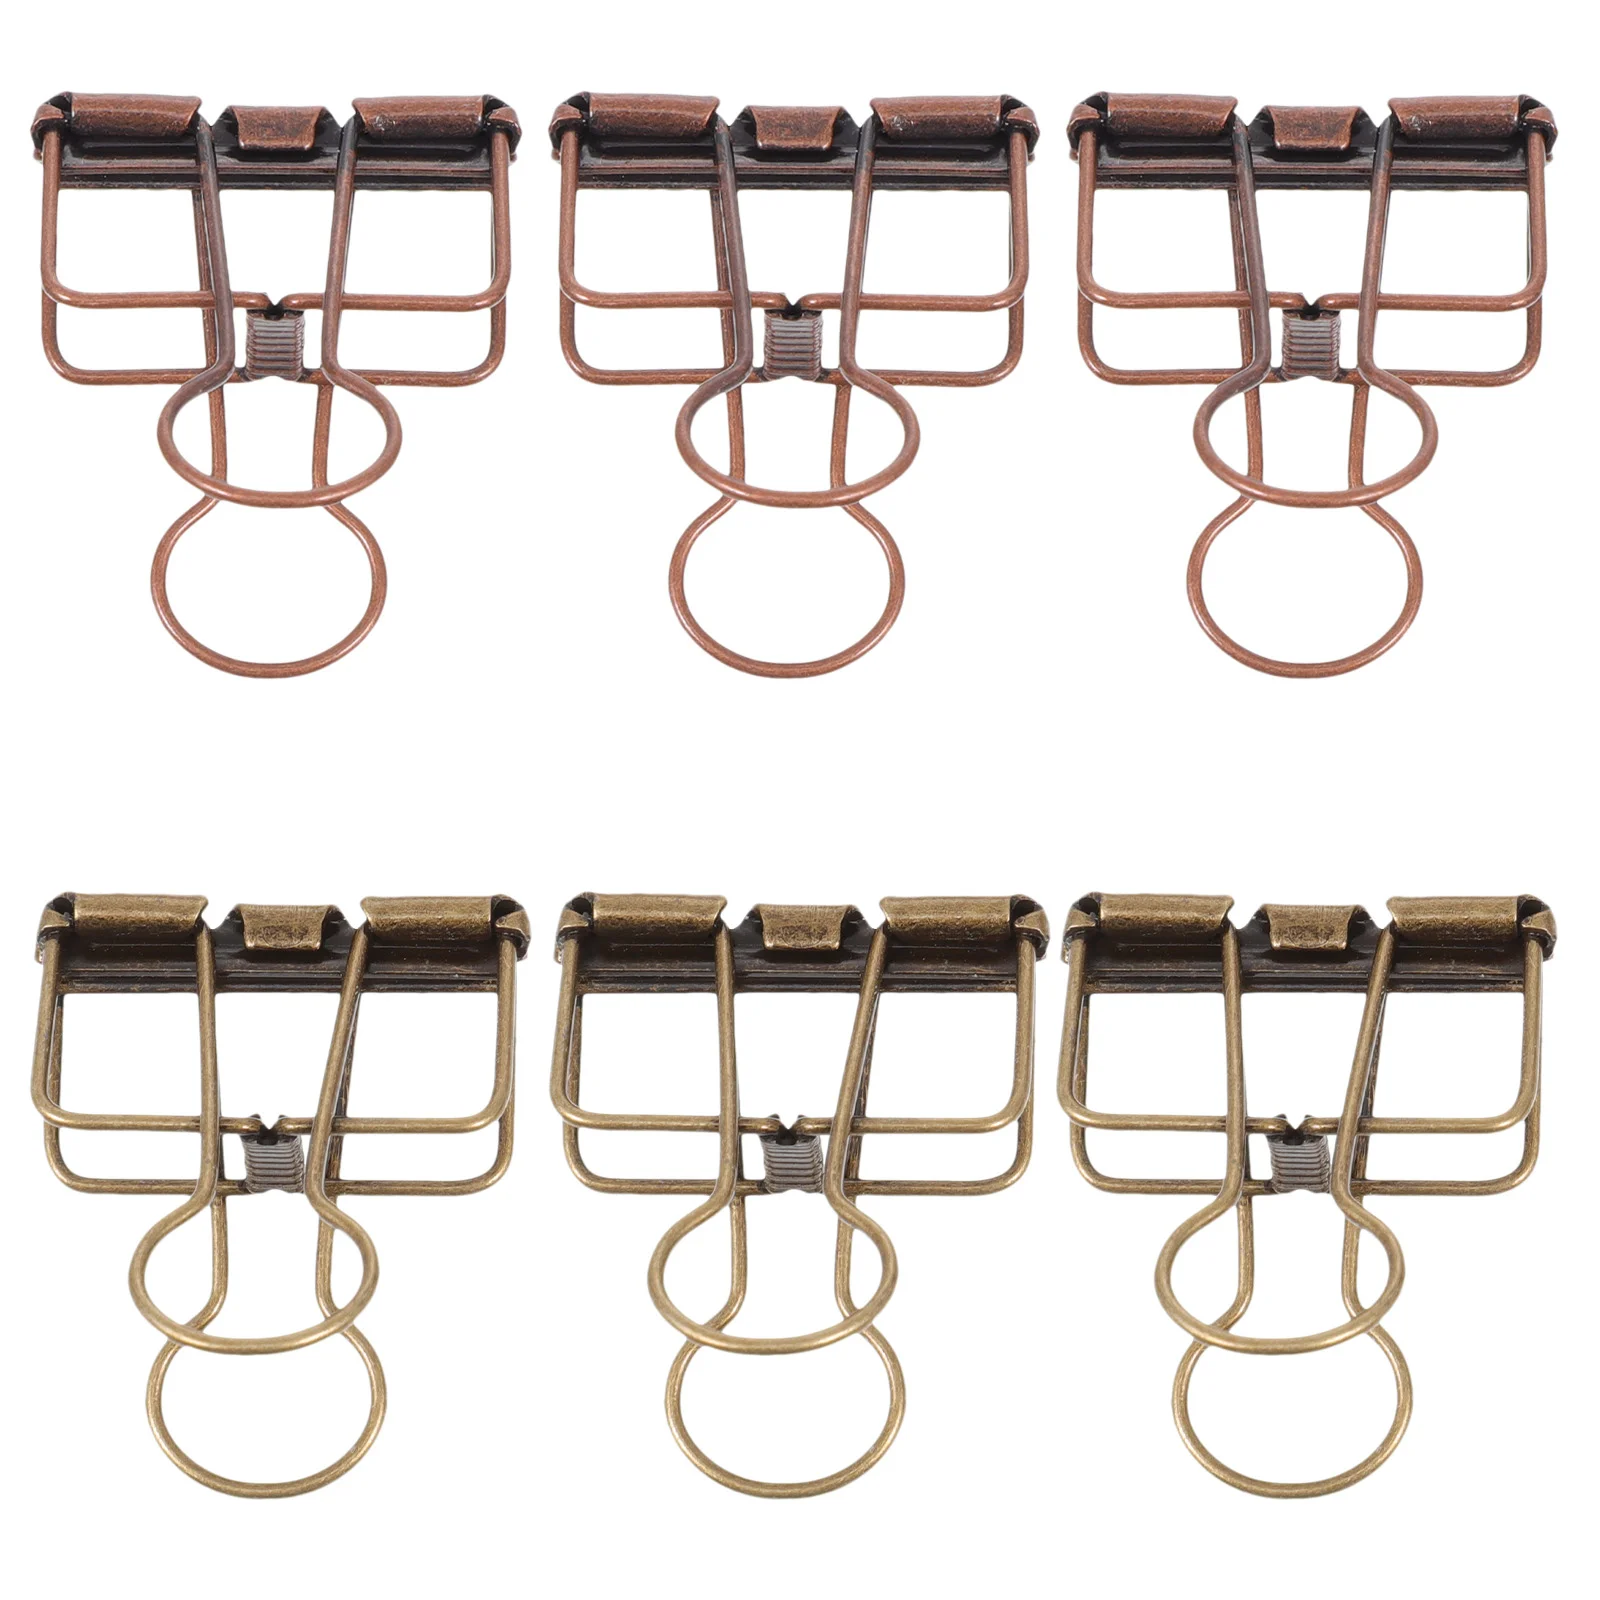 

6 Pcs Elliot Folder File Organizing Clips Small Study Retro Binder Professional Office Clamps Gold Paper Tickets Collection